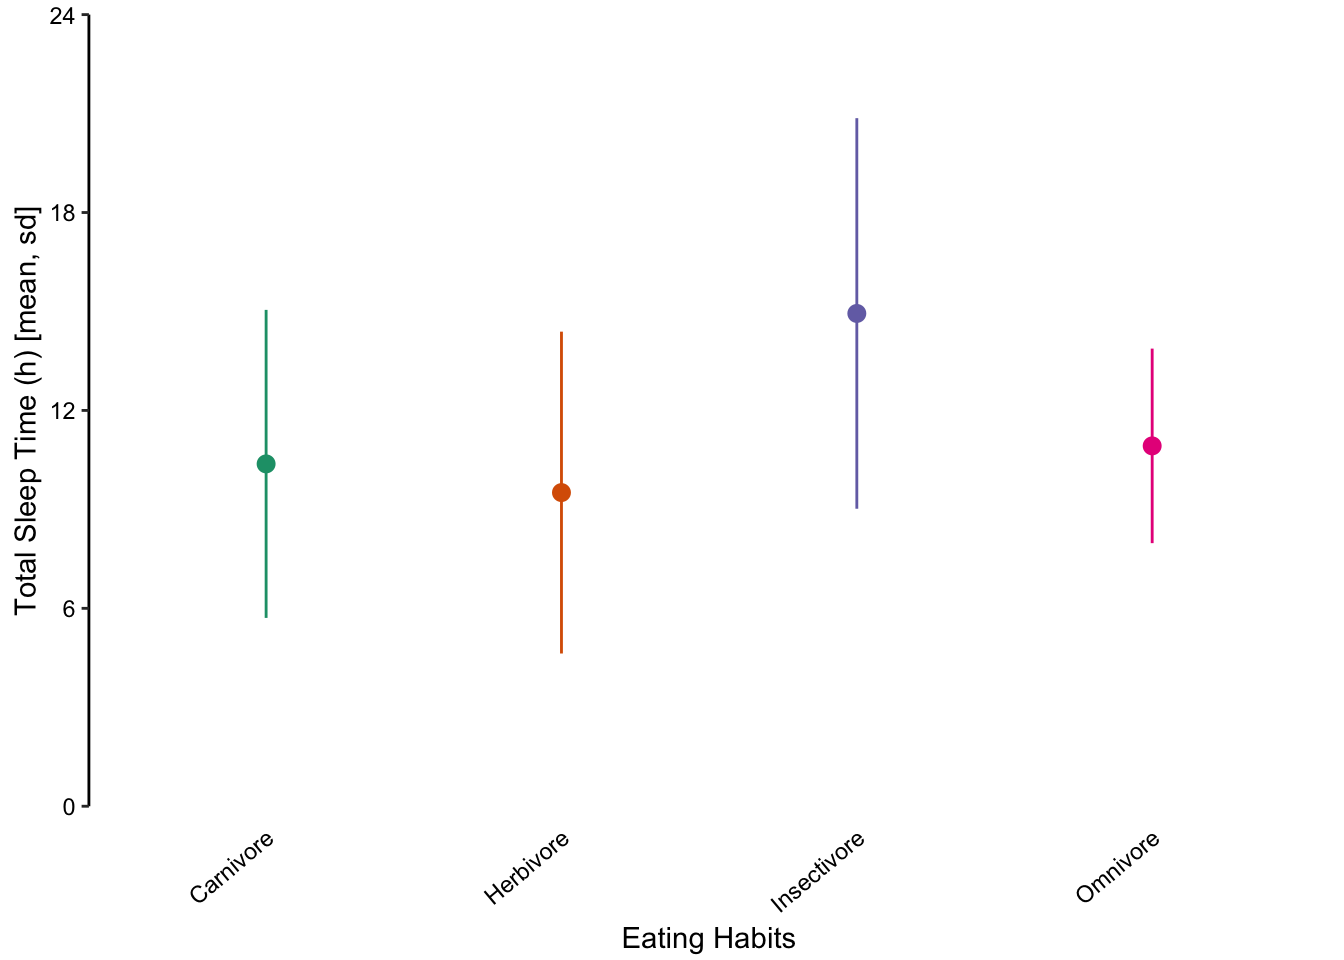 Jittered points are a reasonable alternative to bar plots for depicting the distribution of a data set, in this case the total sleep time according to eating behaviour. _First plot_: Individual observations plotted as a dot plot reveal the entire data set's distribution. _Second plot_: A bar chart showing only the mean and SD masks the underlying distribution. _Third plot_: A simplified dot plot for mean and SD is an improvement, but still obscures the underlying data. _Fourth plot_: Overlaying the individual data points with the mean and SD provide both the distribution and descriptive statistics.